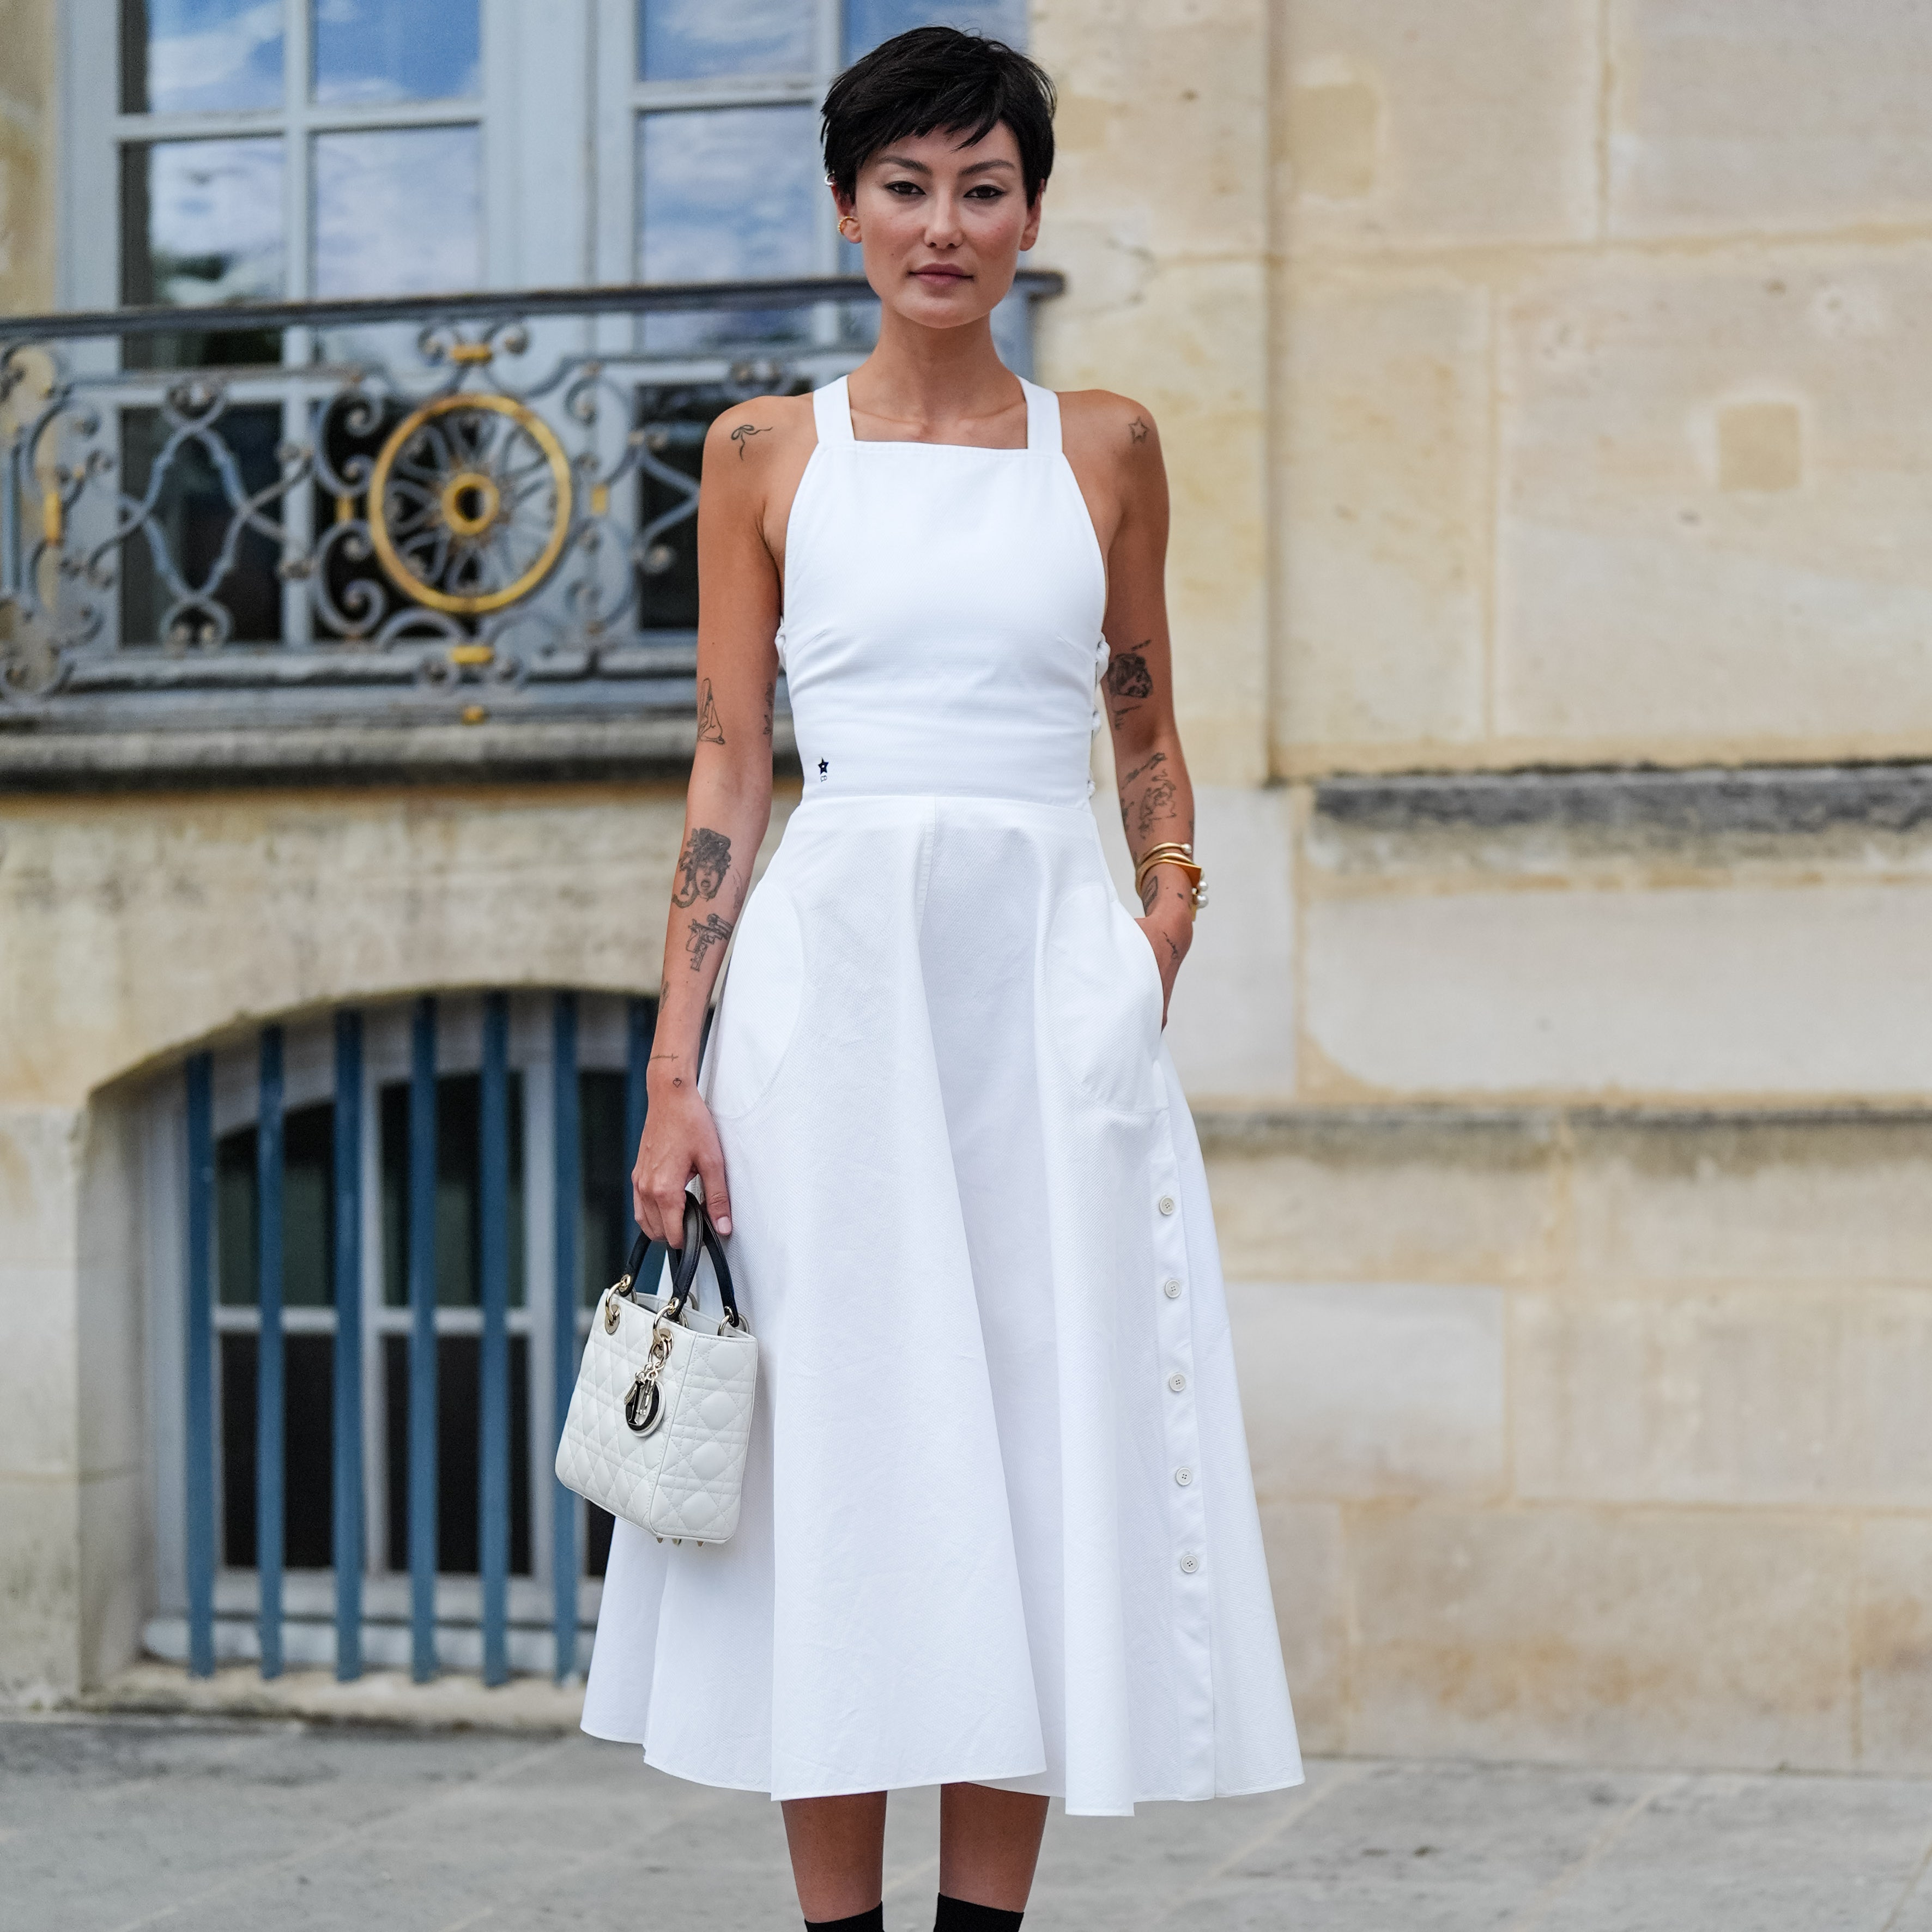 5 Easy-To-Copy Summer Looks Spotted Outside The Paris Couture Shows